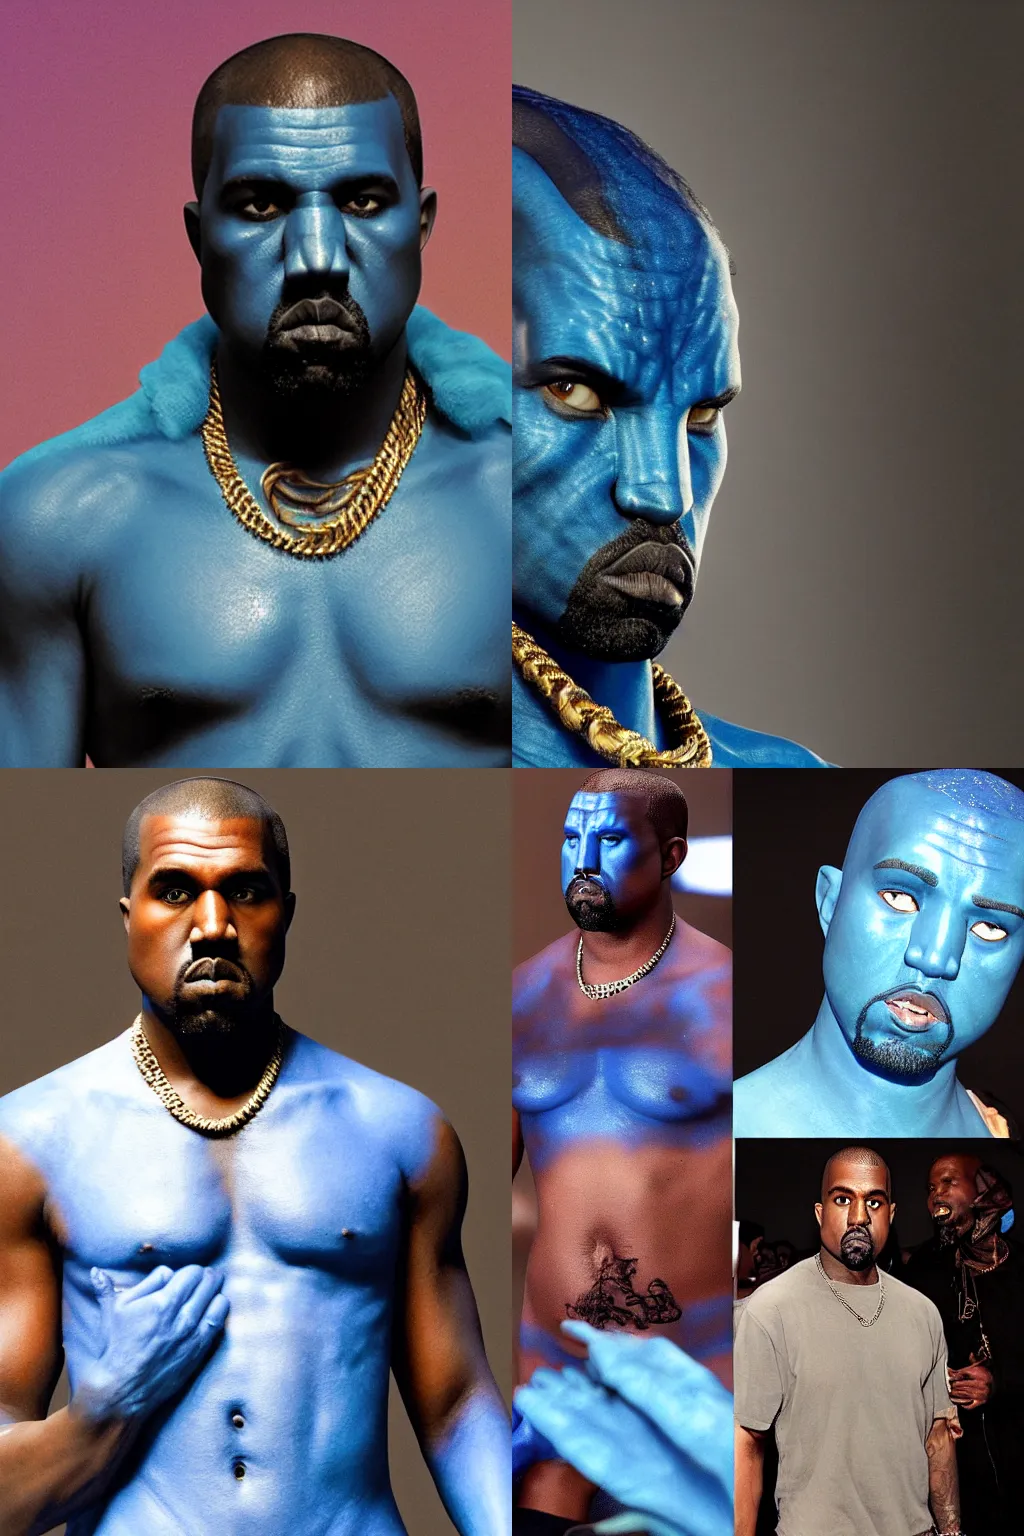 Prompt: kanye west as a blue skinned na\'vi in avatar by james cameron